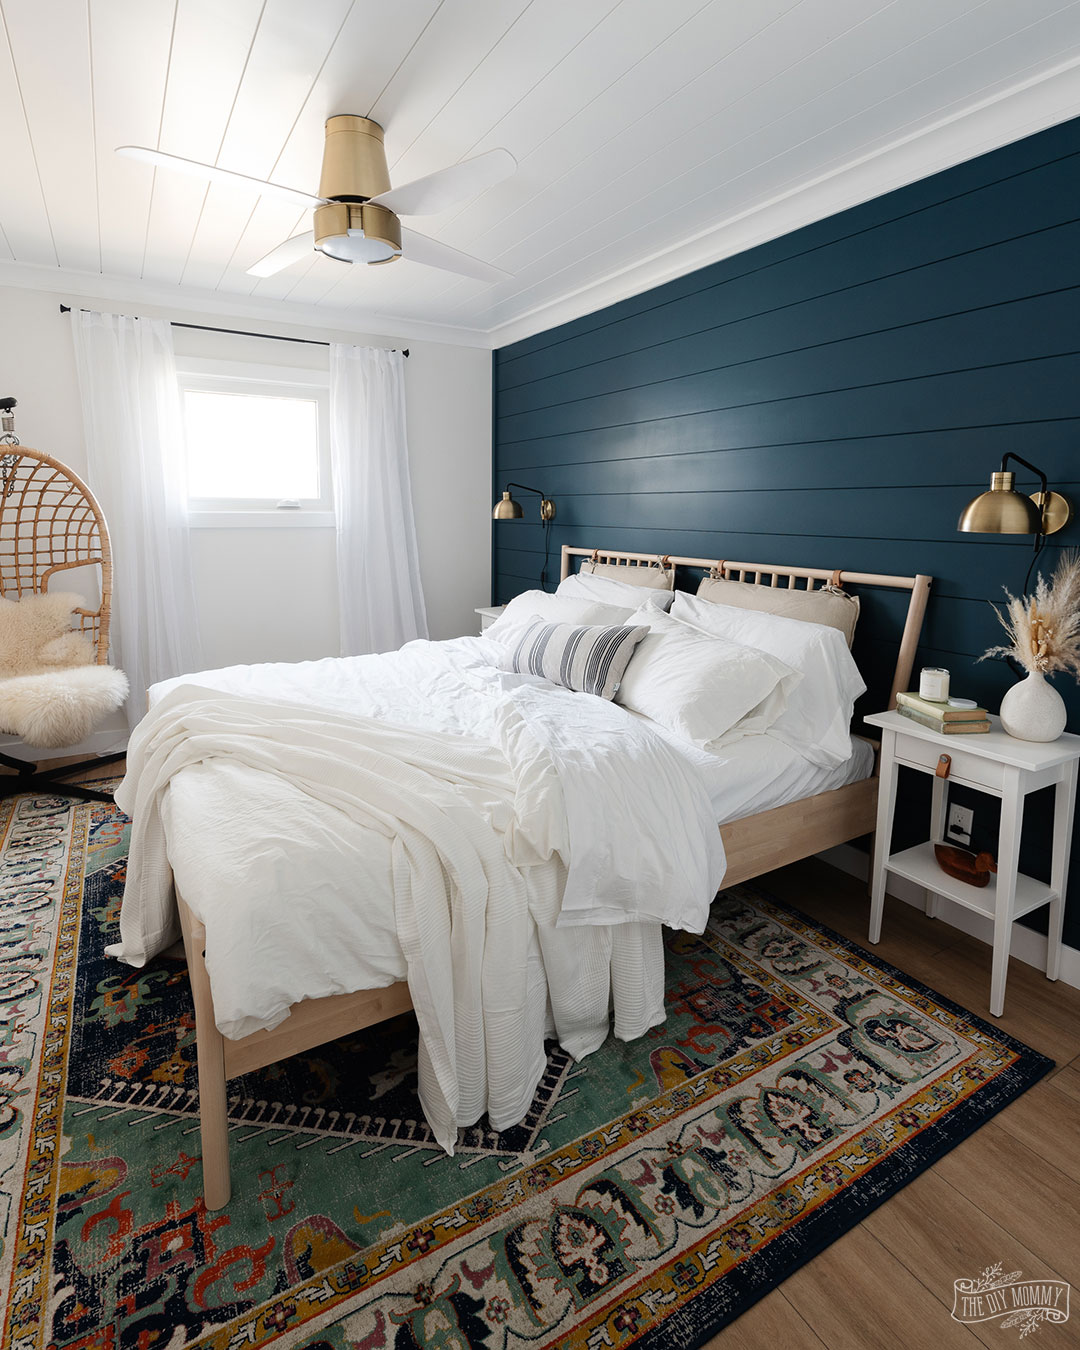 Modern coastal bedroom makeover with deep blue shiplap wall, vinyl plank flooring, IKEA furniture, and gold accents